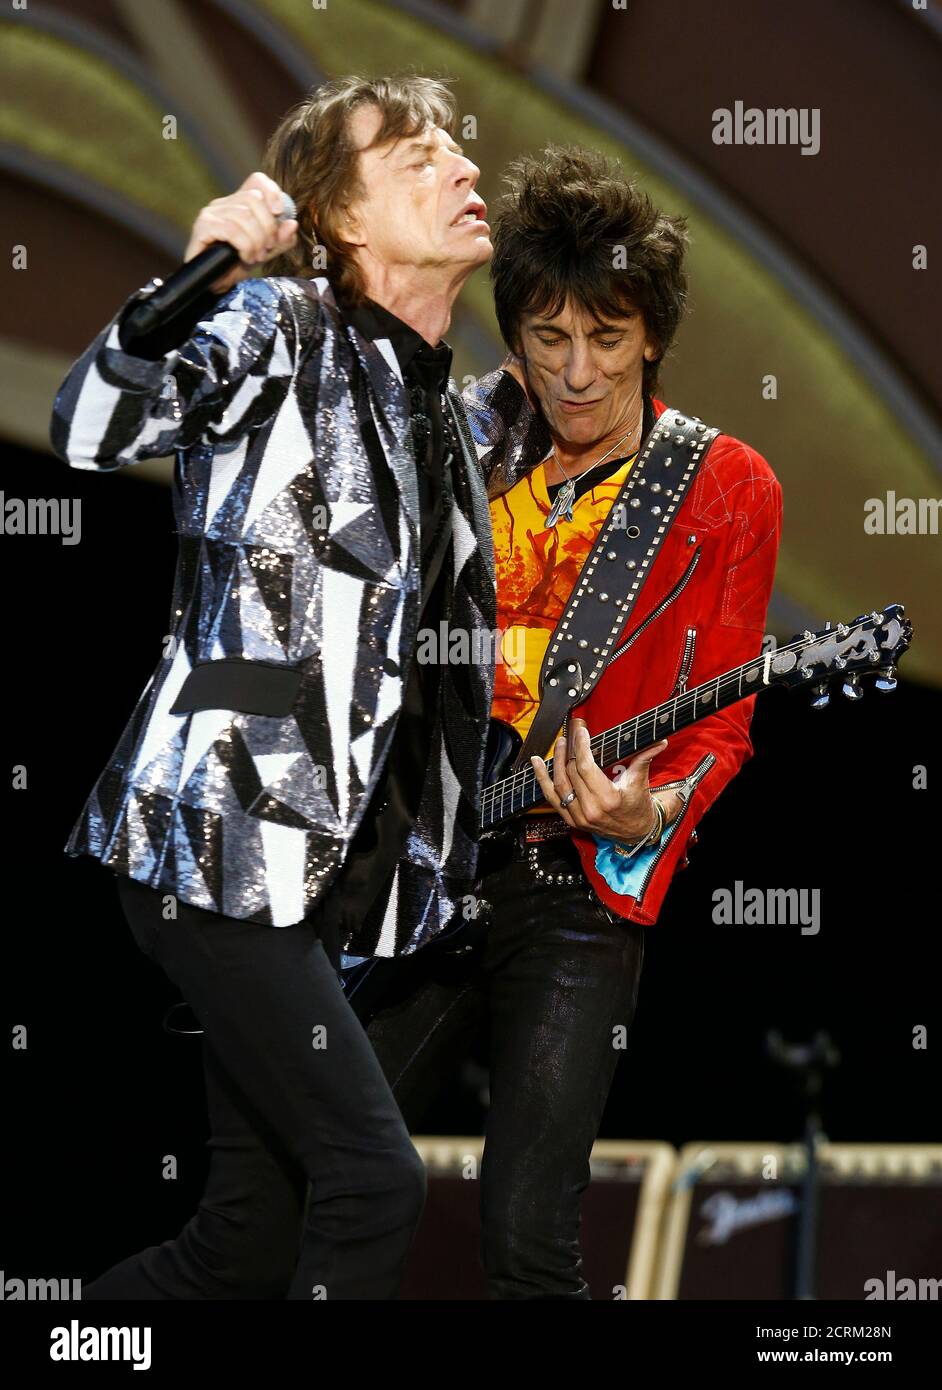 Mick Jagger and Ronnie Wood (R) of the Rolling Stones perform during their  "14 on Fire" concert at the Letzigrund Stadium in Zurich June 1, 2014.  REUTERS/Arnd Wiegmann (SWITZERLAND - Tags: ENTERTAINMENT